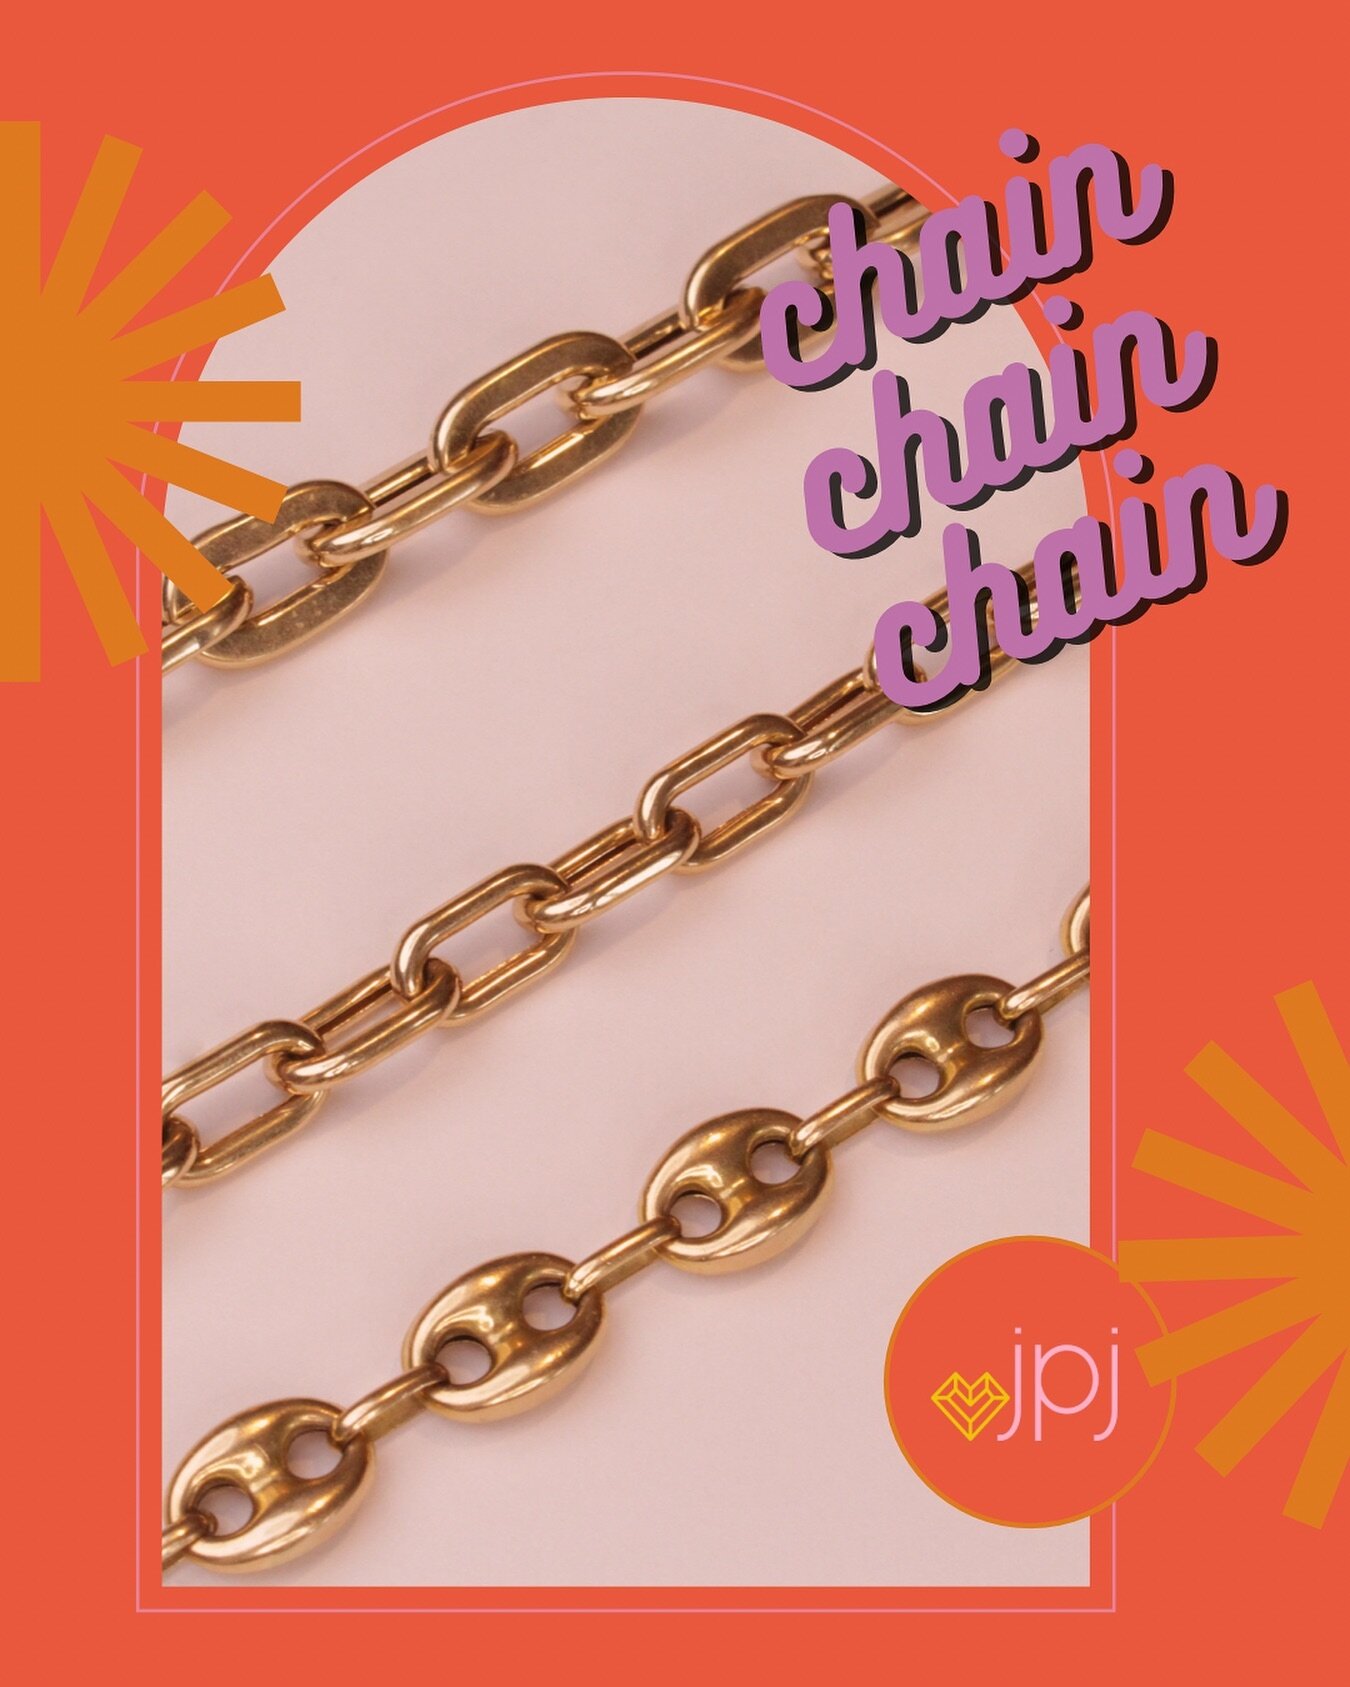 You can never go wrong with a classic gold chain. Wear one or wear them all at once&hellip;Which one do you have your eye on?
💕
#classicstyle #chic #jewelry #finejewelry #goldchain #bracelet #spring #styleinspo